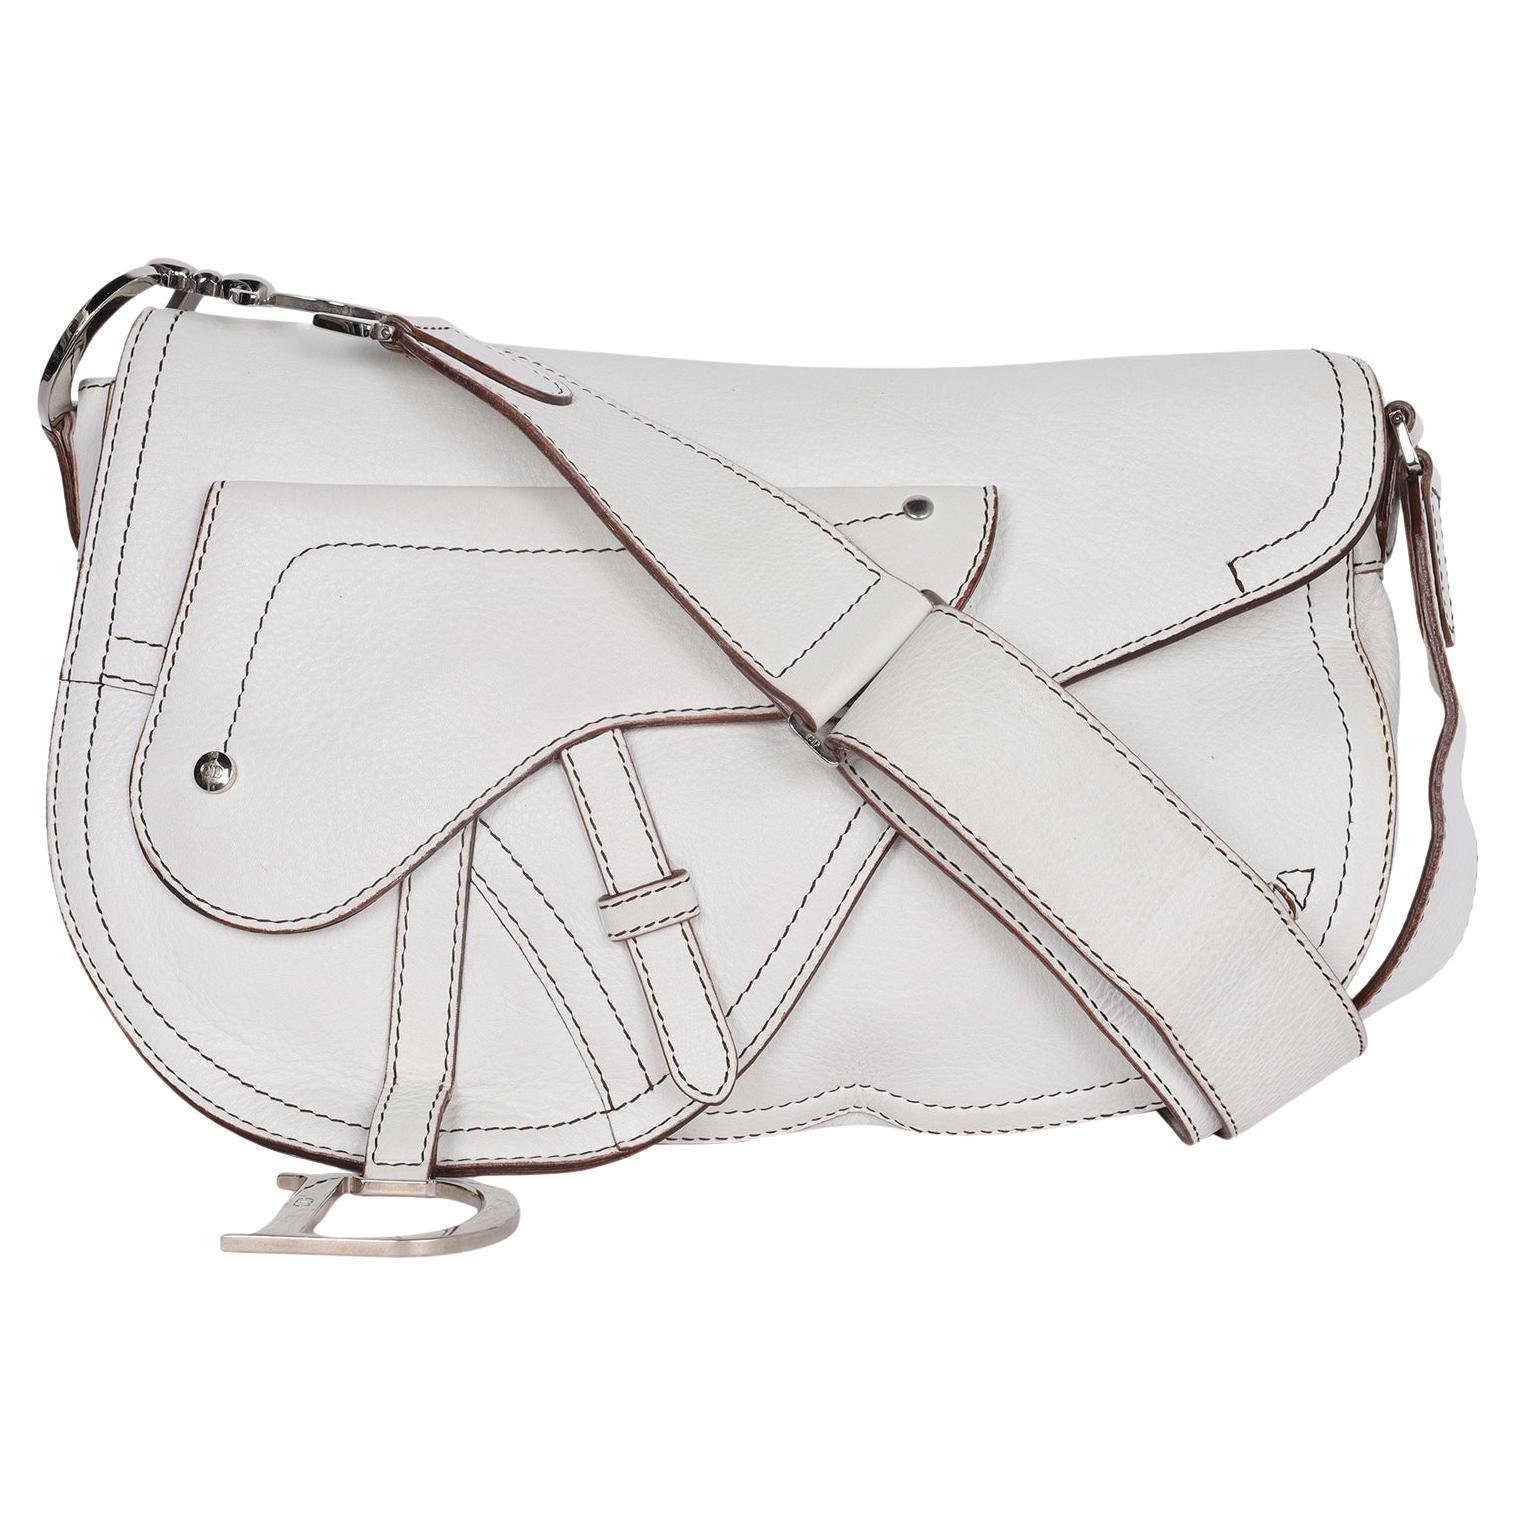 Authentic, pre-loved Christian Dior White Leather Saddle Messenger Crossbody Bag. Features great design elements with durable white leather in the now iconic Dior saddle bag with a prominent decorative frontal zipper pocket. It has extensive leather